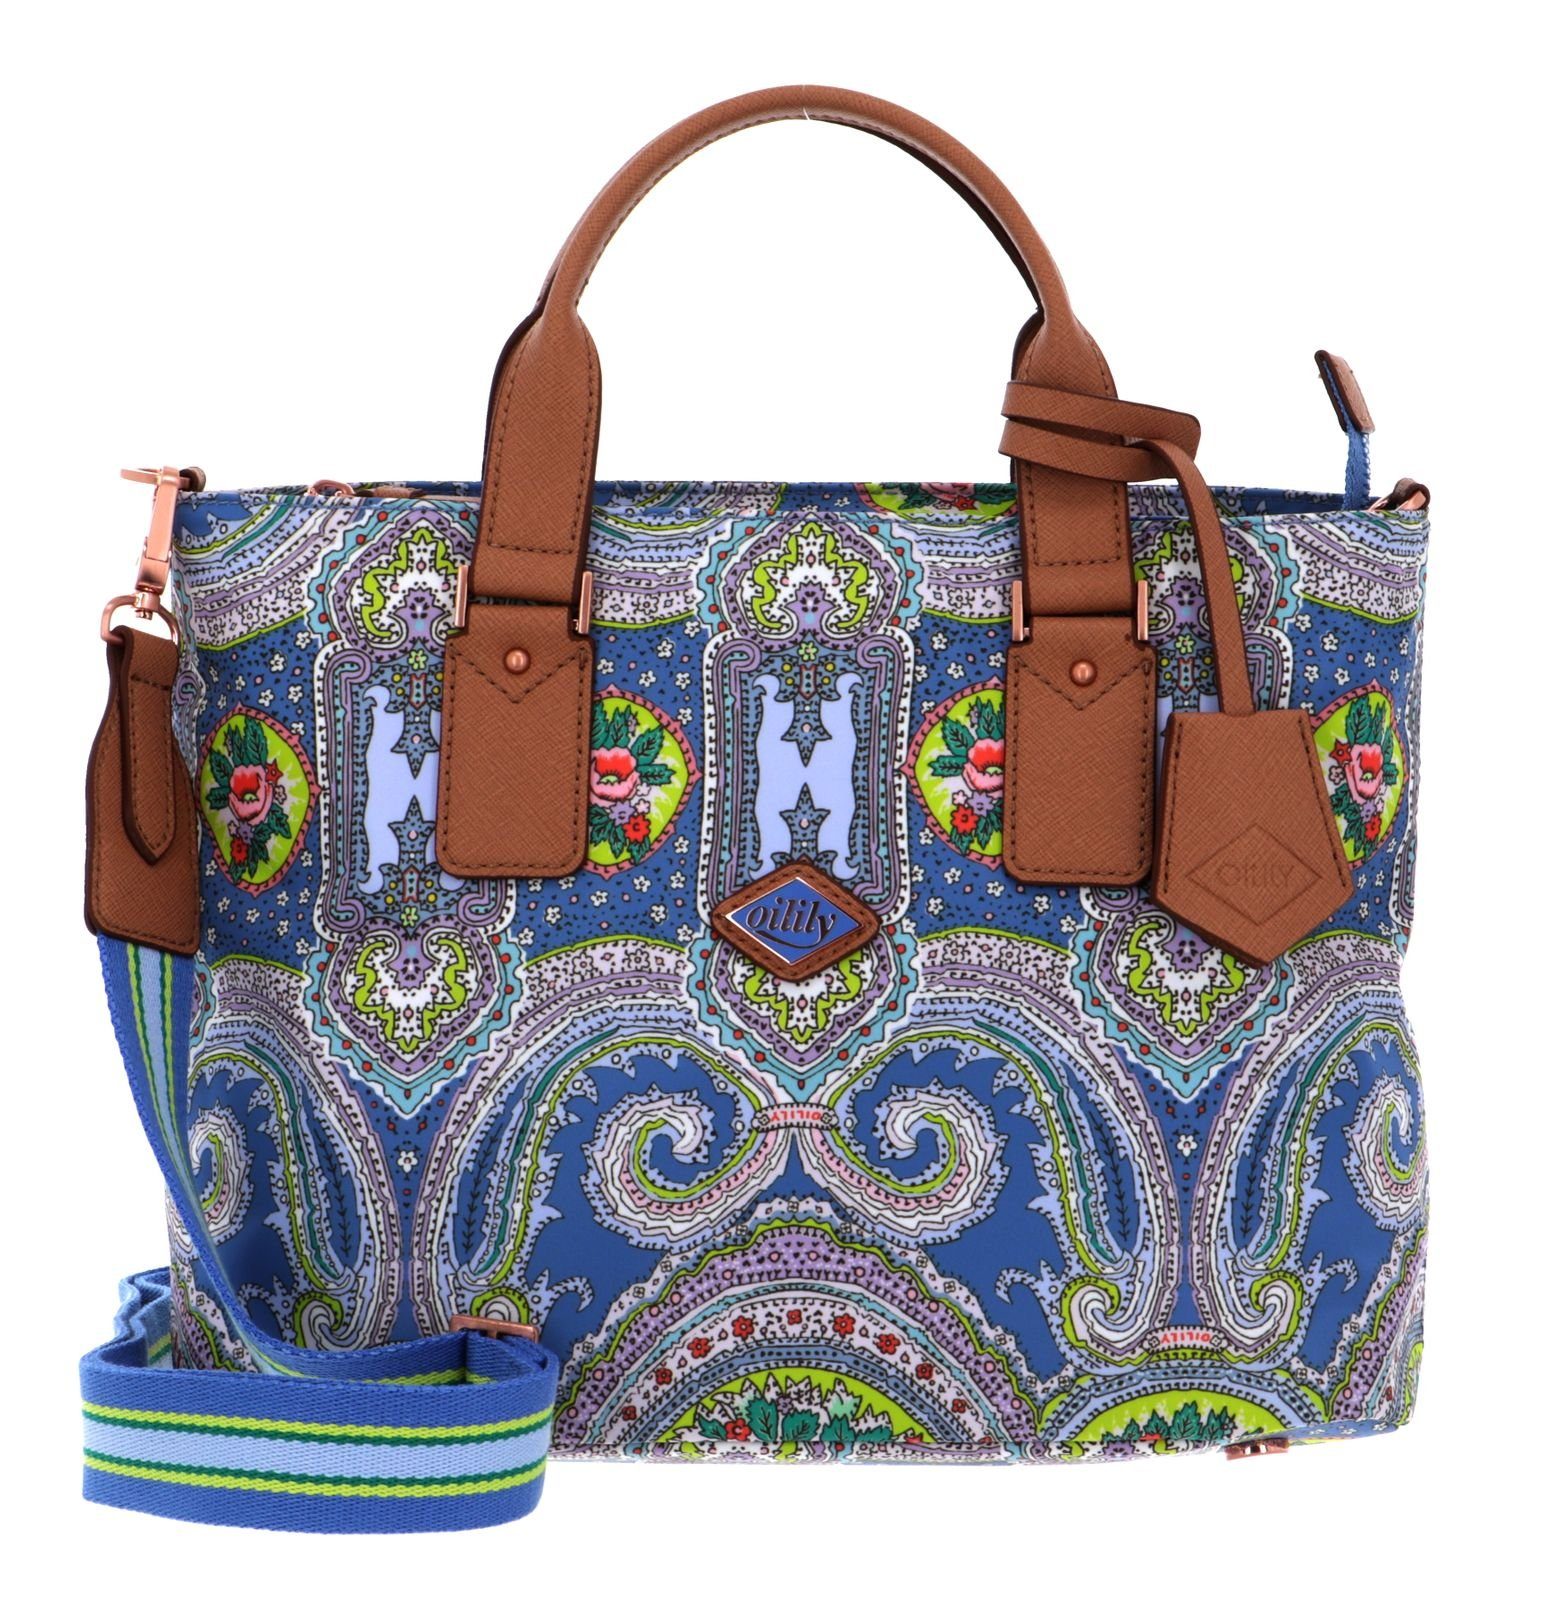 Oilily Handtasche City Rose Paisley Riviera